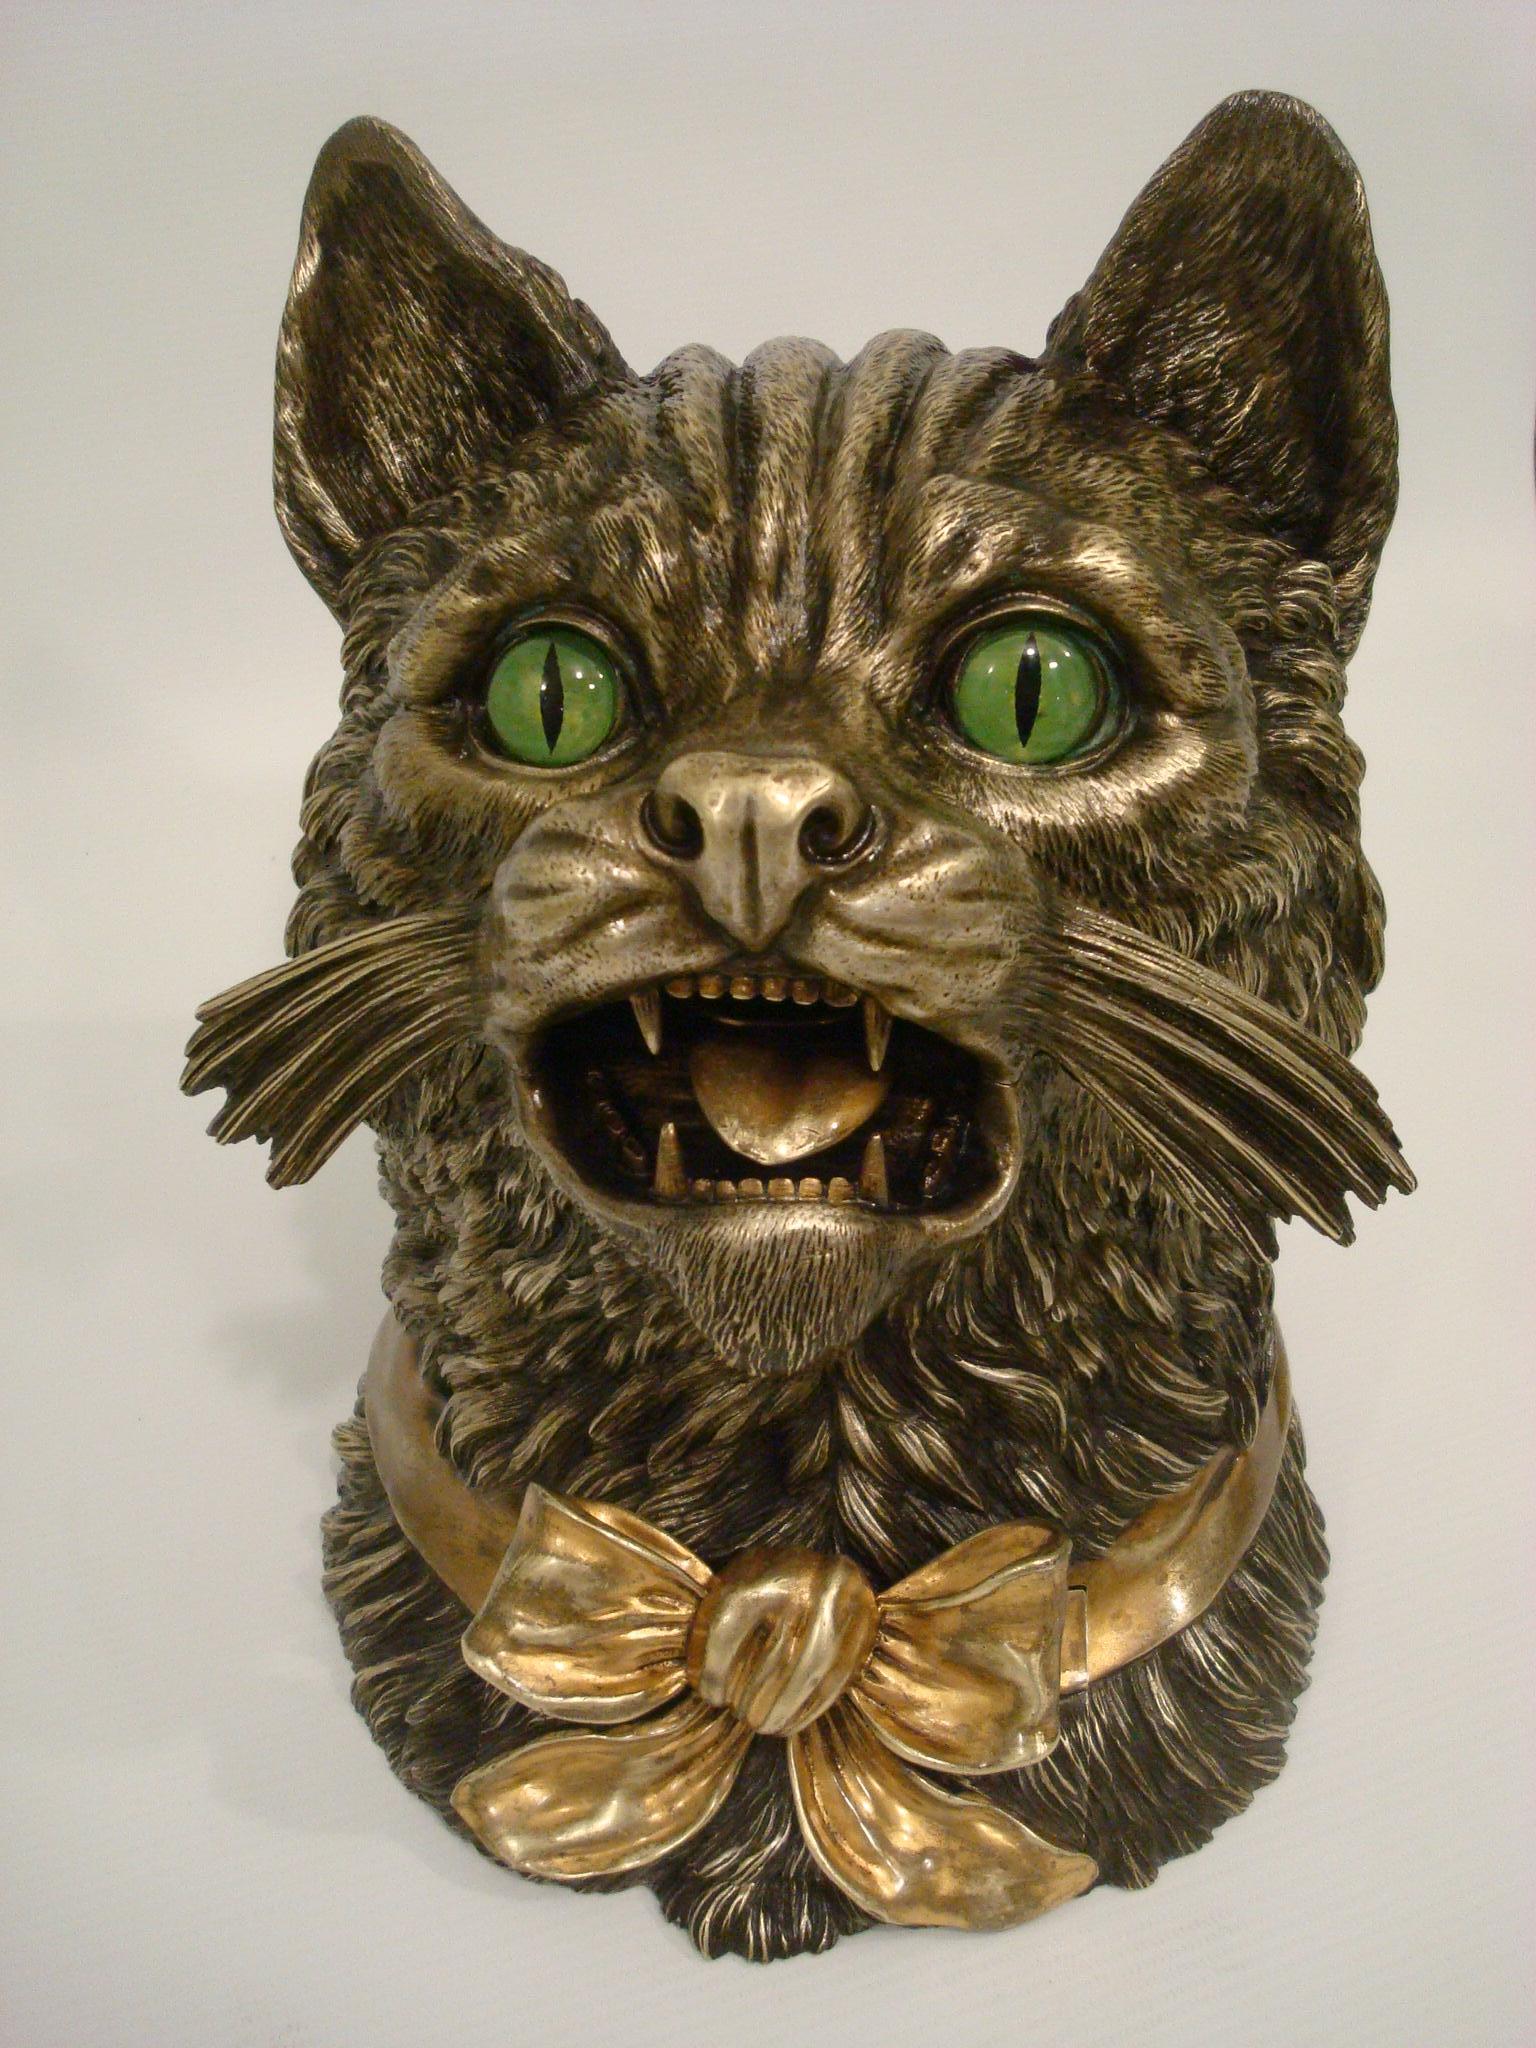 For cat lovers, Silvered bronze humidor realistically shaped as a cat's head. Opens to reveal humidor space. Large container for cigards and smaller one for cigarettes or matches. Large ribbon around neck opends as a storage draw.
Wear consistent